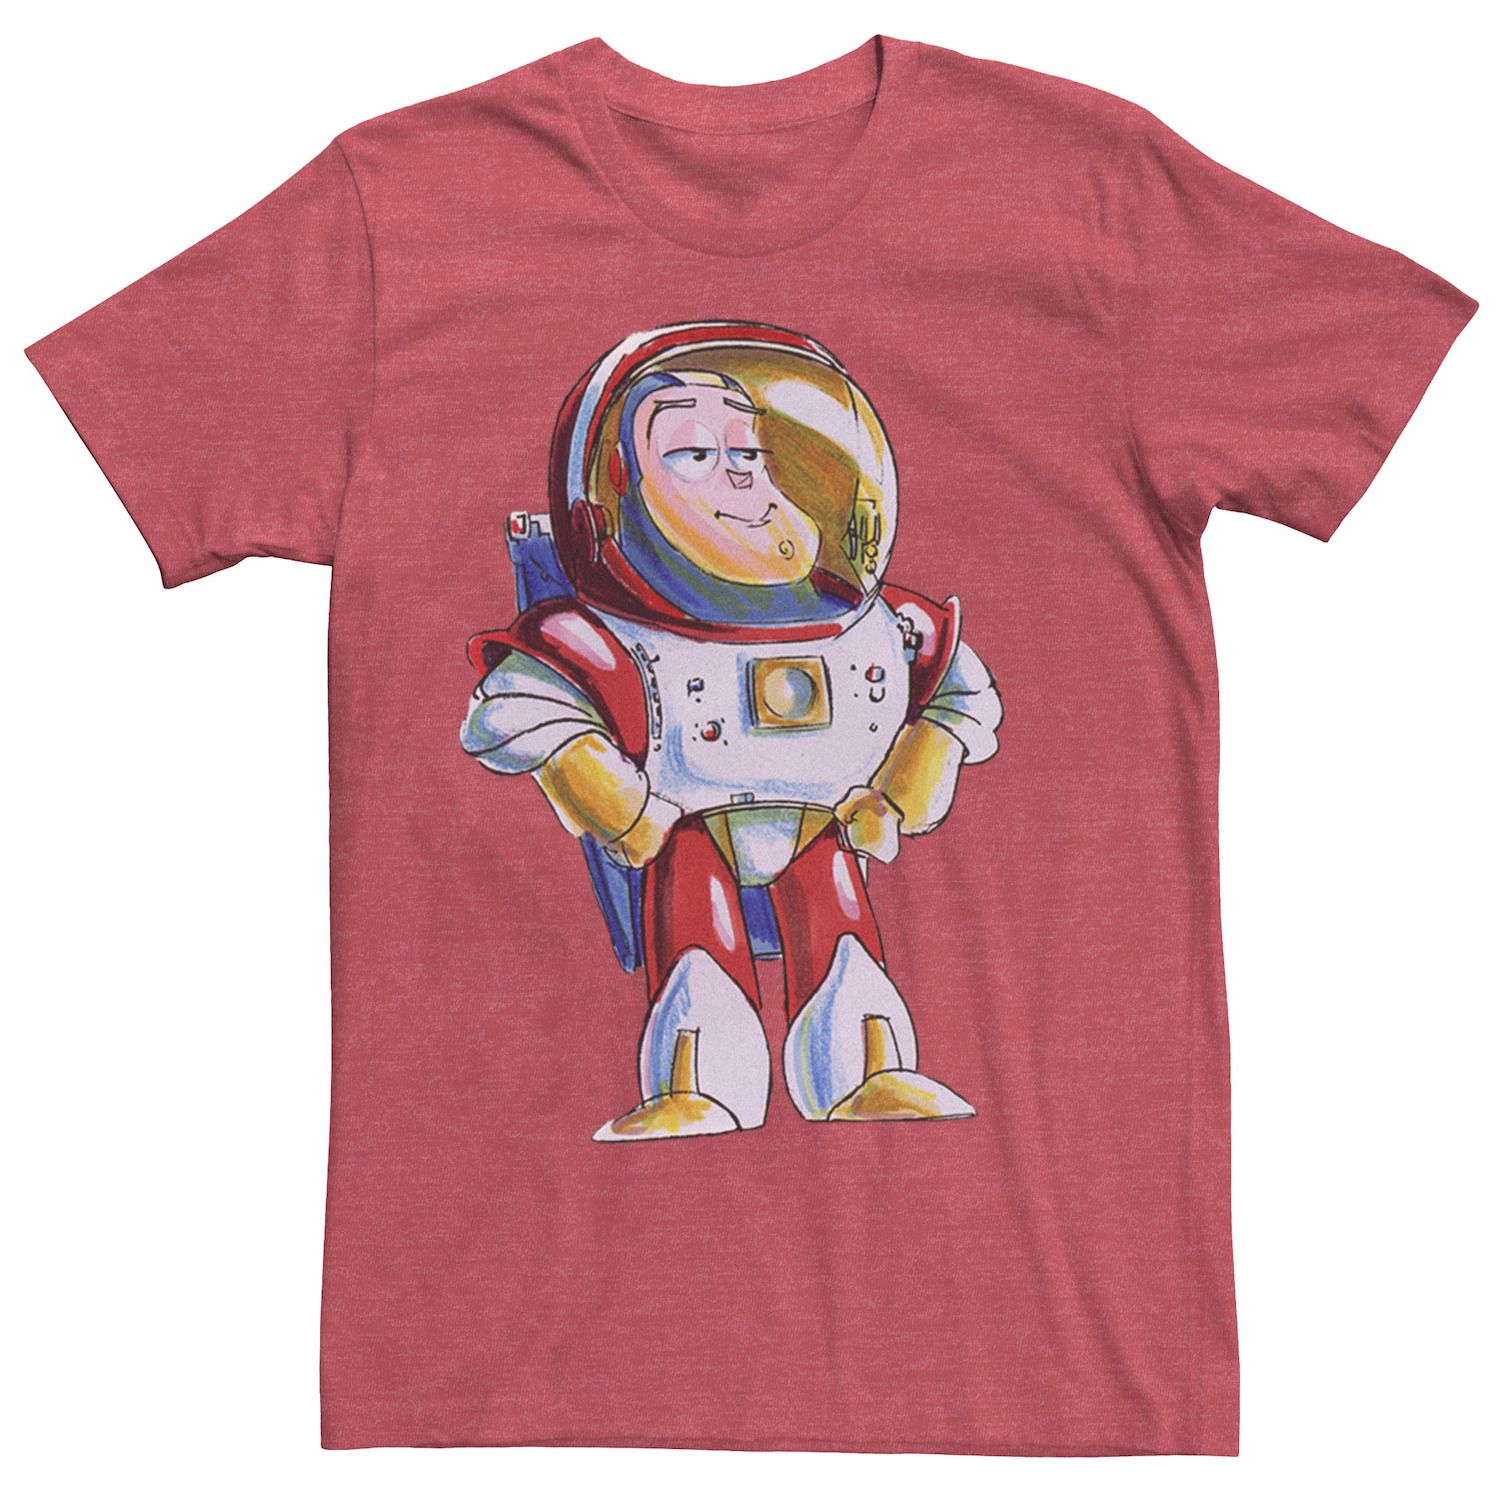 Image for Disney / Pixar Men's Toy Story Buzz Lightyear Sketch Tee at Kohl's.